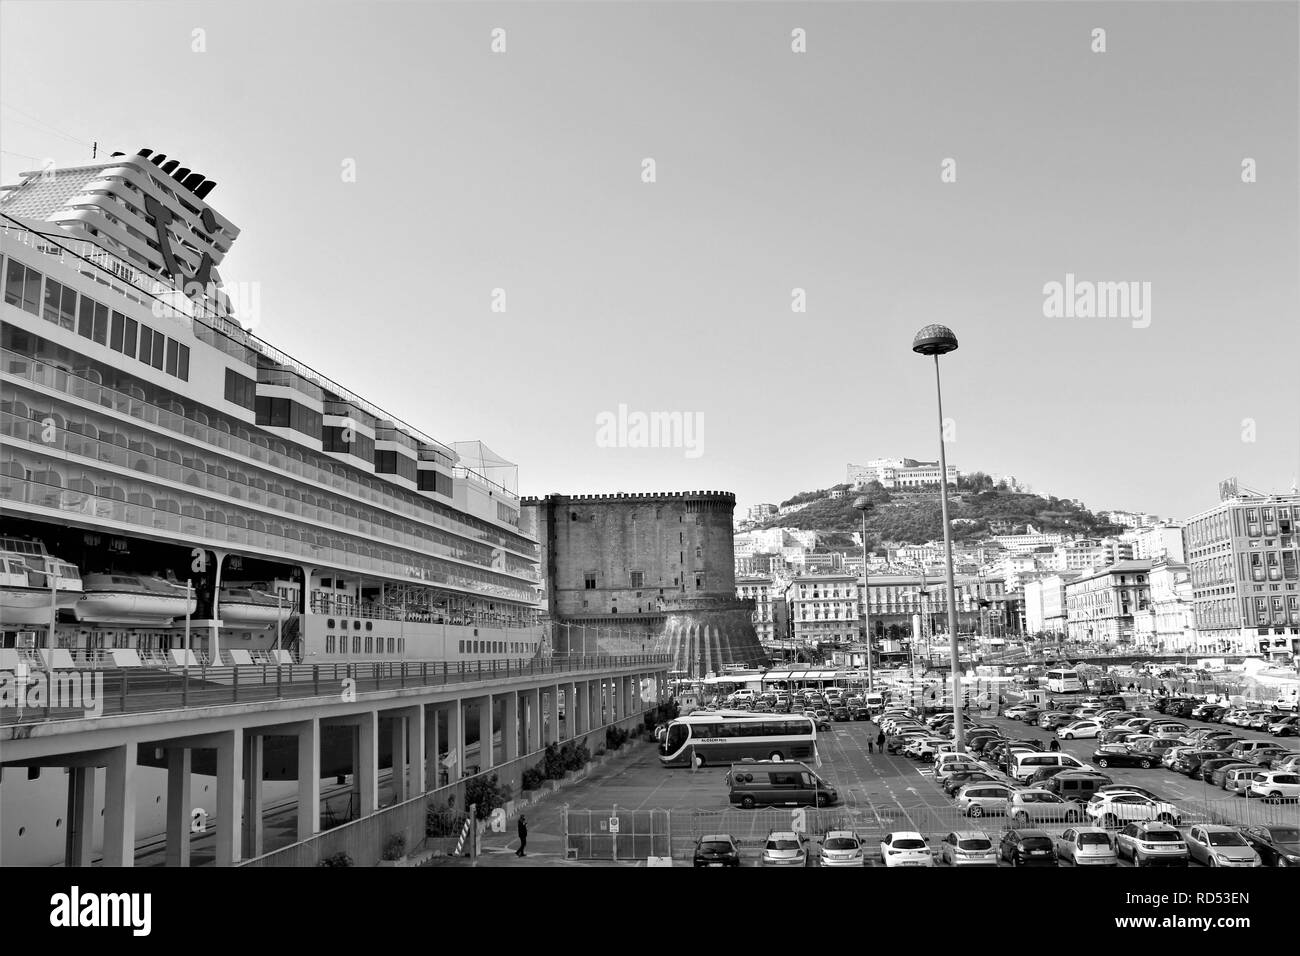 Naples, Italy - October 23rd 2018: Afternoon view of the Marella Explorer TUI Cruise Ship docked in the busy port of Naples. Stock Photo